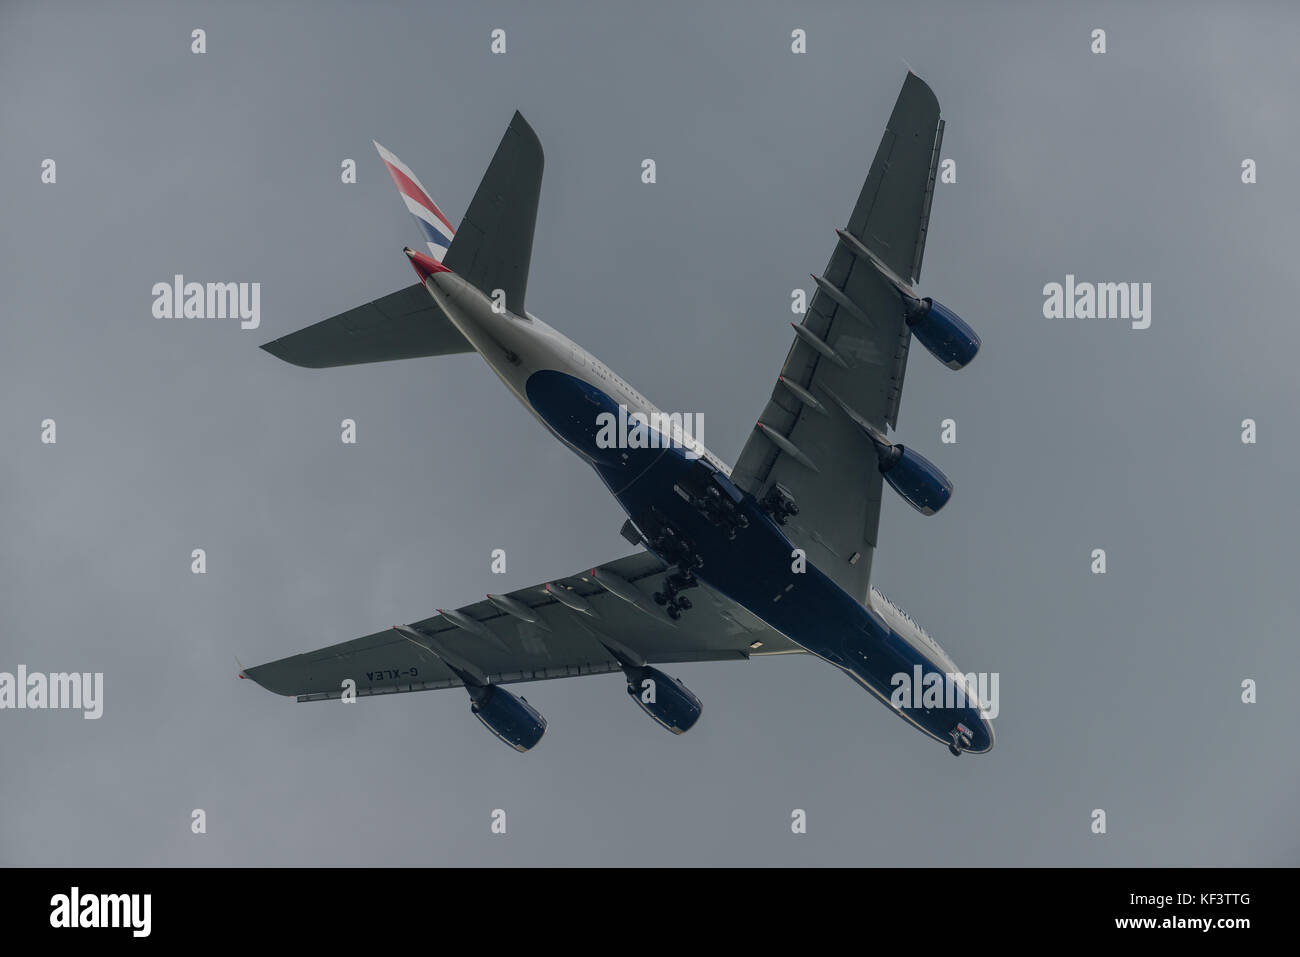 Airbus A380 on approach to Heathrow Airport, London, United Kingdom Stock Photo